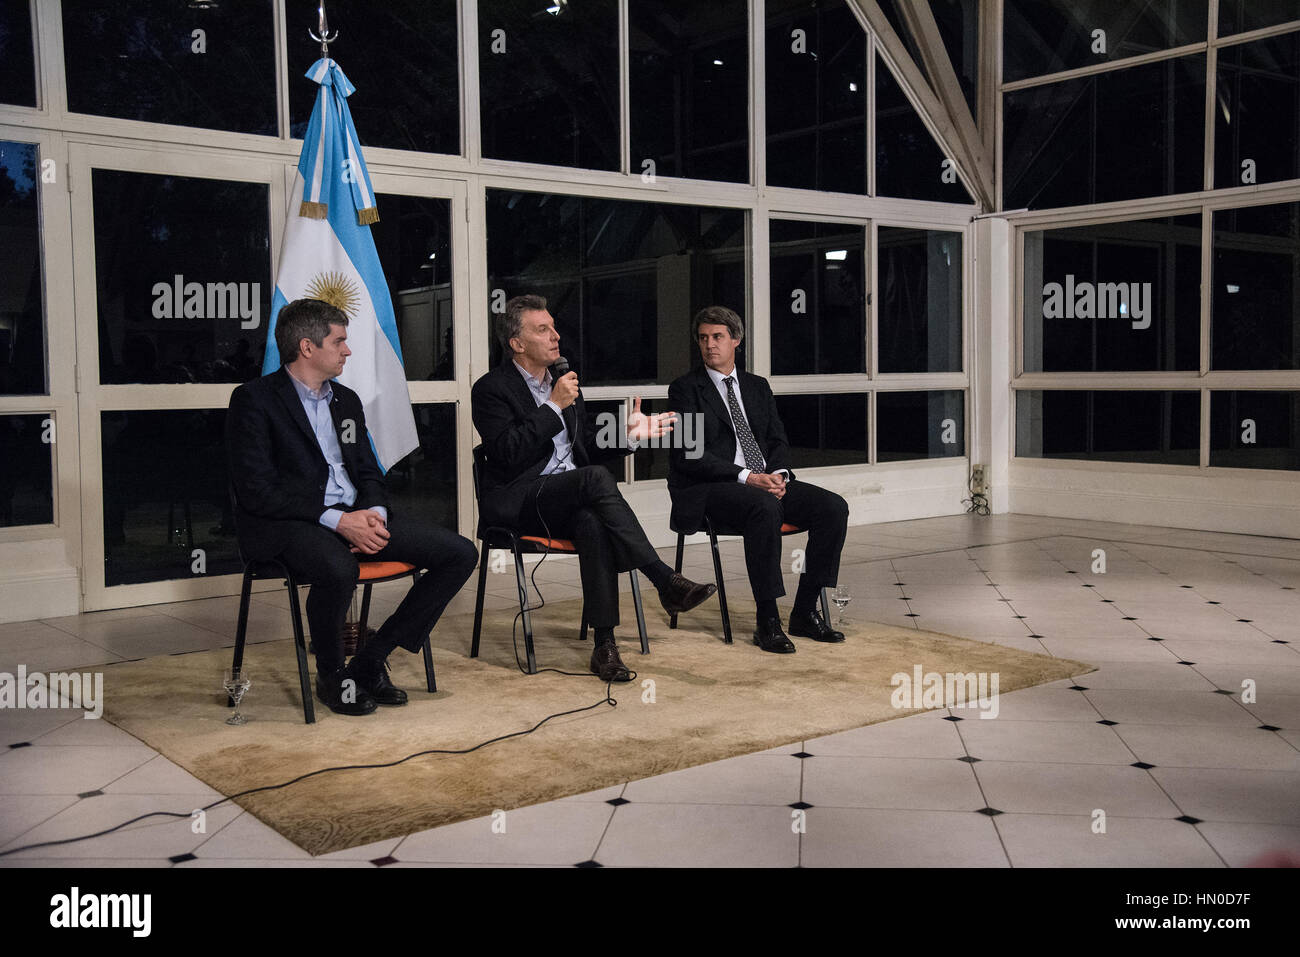 Olivos, Argentina - May 6, 2016: President of Argentina Mauricio Macri (C), Finance Minister Alfonso Prat-Gay (R) and Cabinet Chief Marcos Pena. Stock Photo